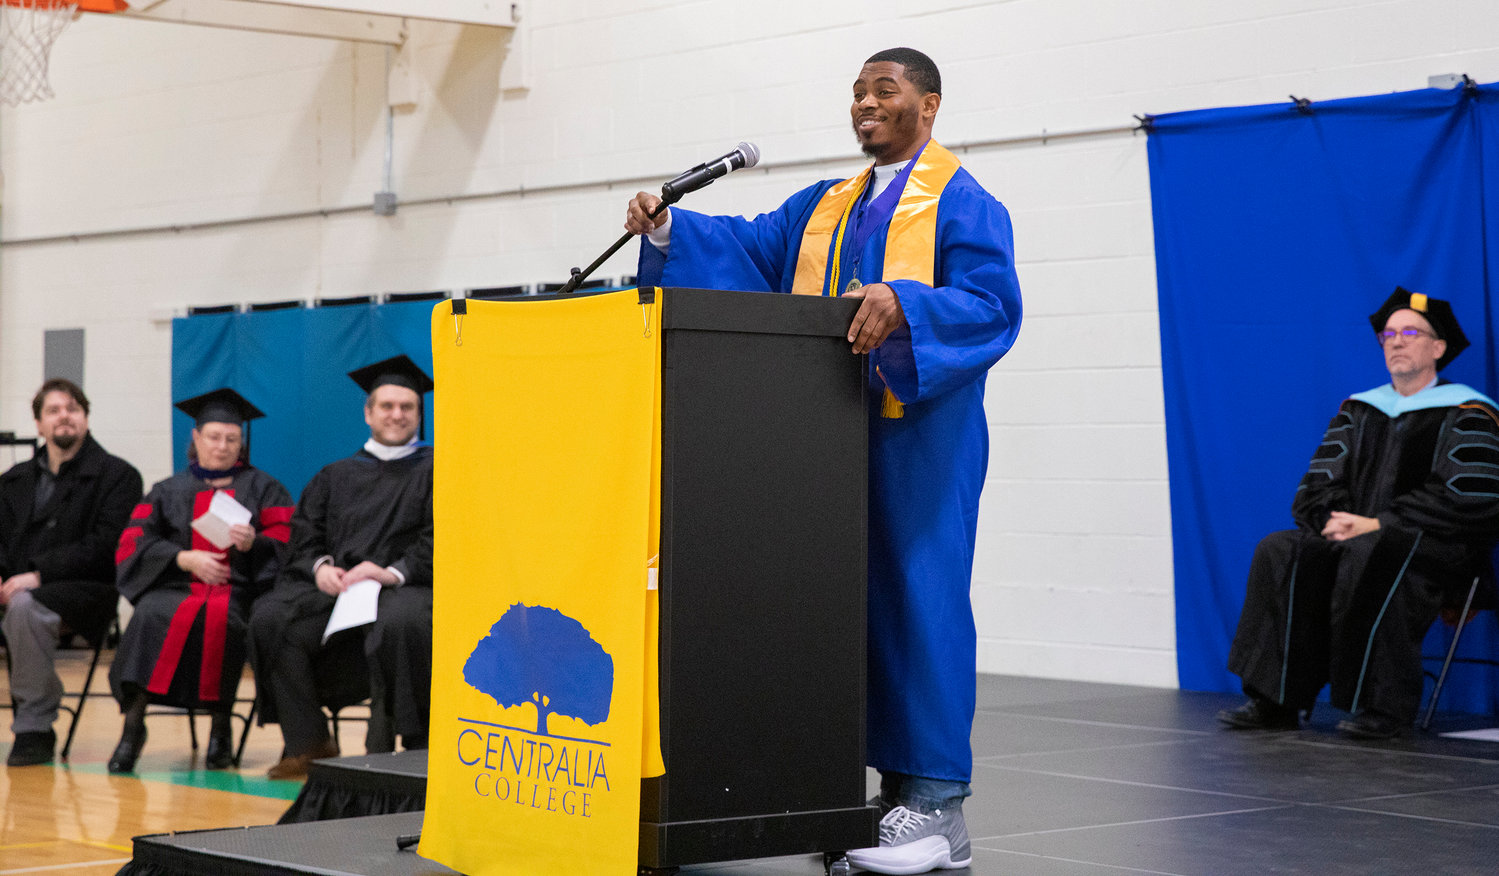 Anthony Smith smiles and makes a speech on stage during a graduation ceremony for Centralia College graduates held at the Green Hill School on Wednesday in Chehalis.